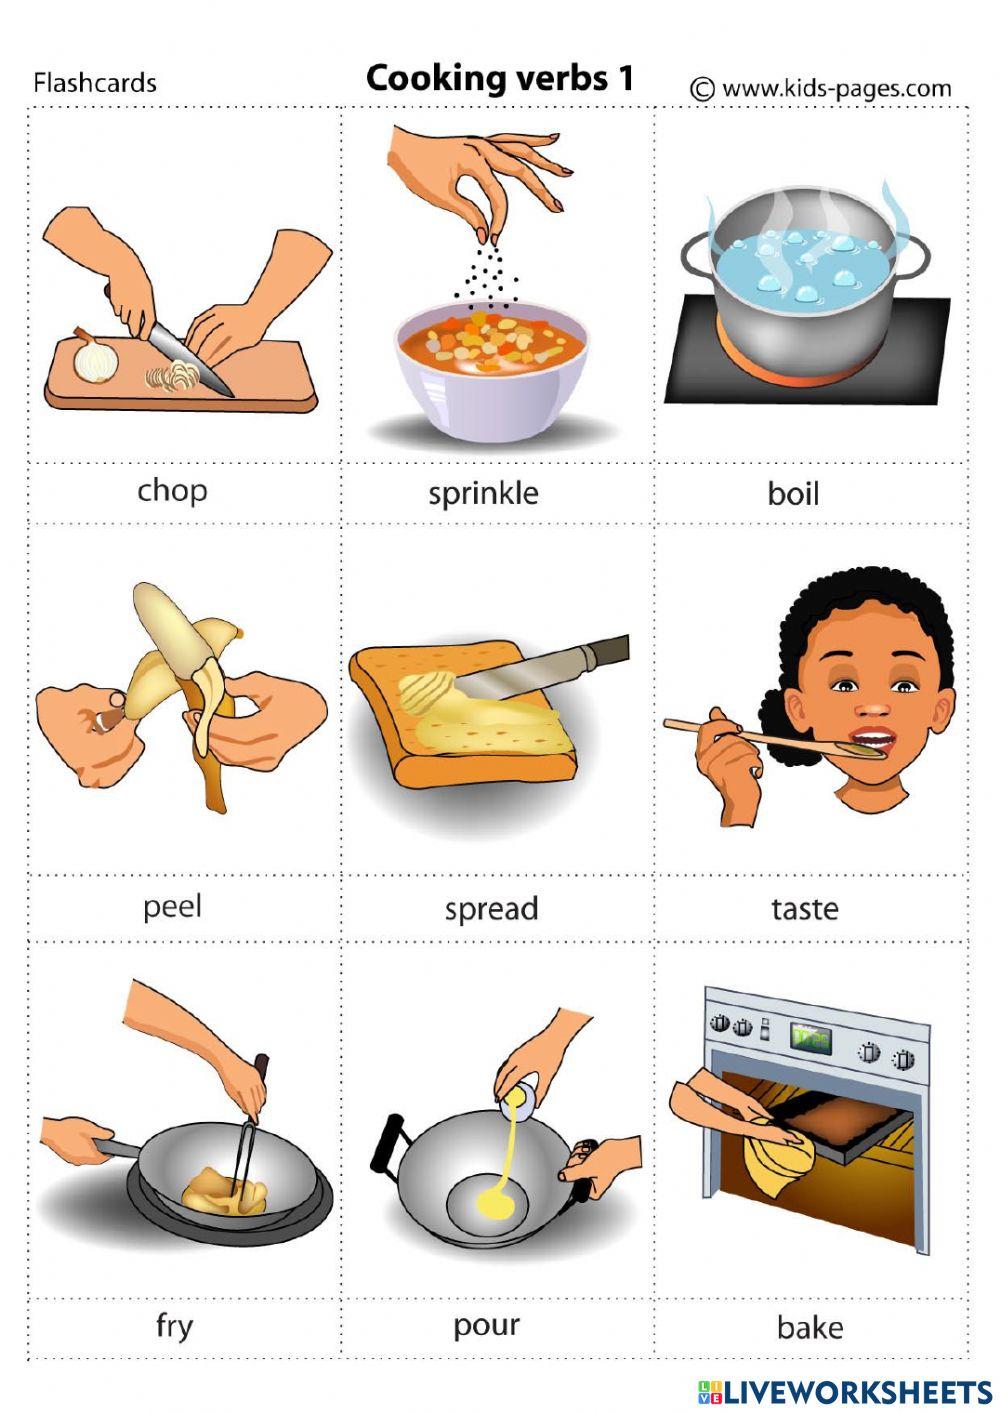 Cooking verbs for Kids. Глаголы готовки на английском. Приготовление еды на английском языке. Глаголы приготовления пищи на английском. Переведи на английский готовить